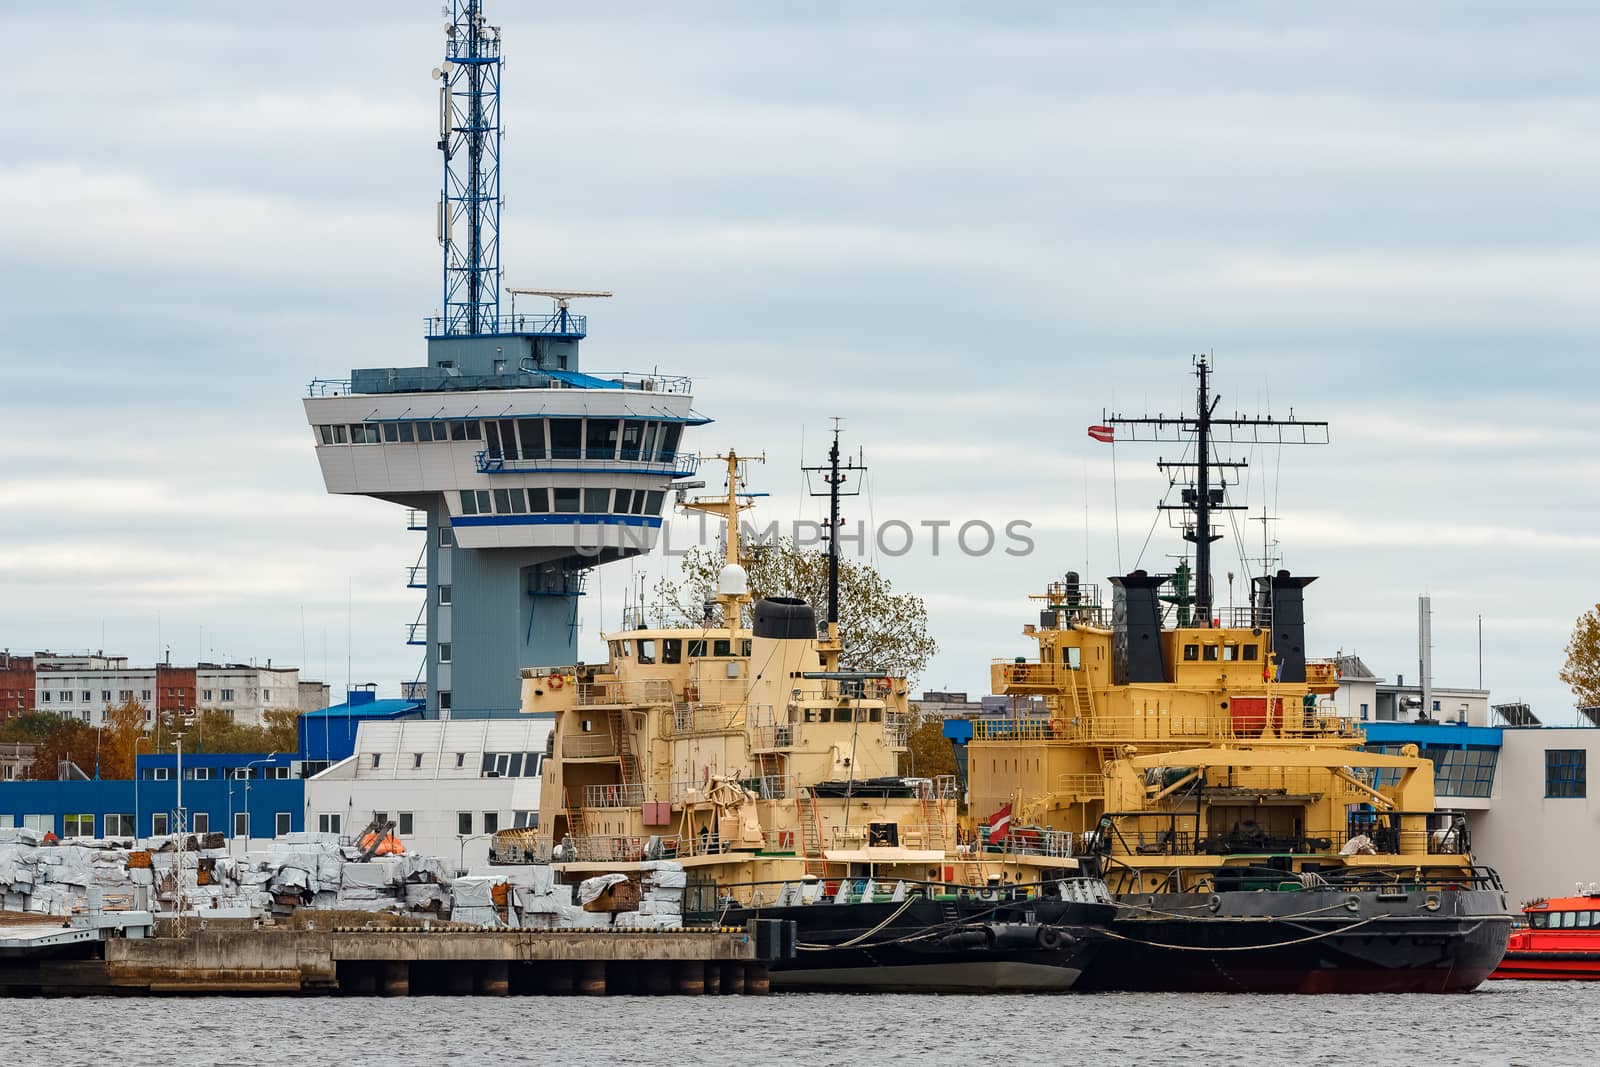 Yellow icebreakers moored at the port of Riga, Europe